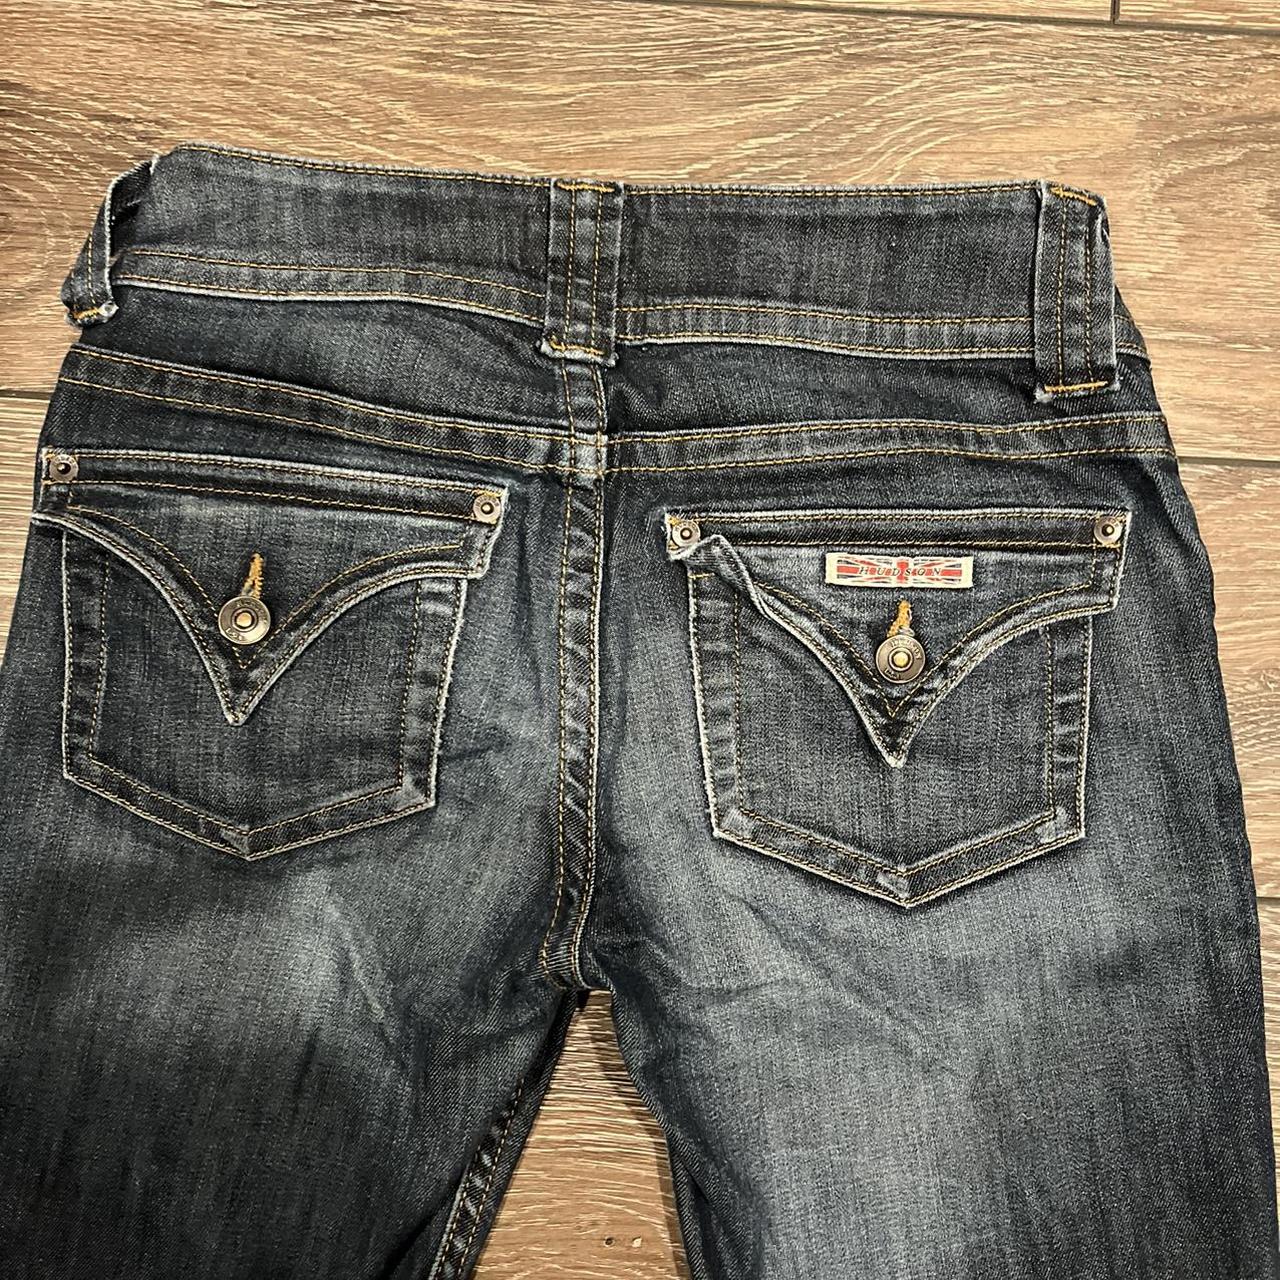 Hudson low-rise flare jeans send offers, price is... - Depop